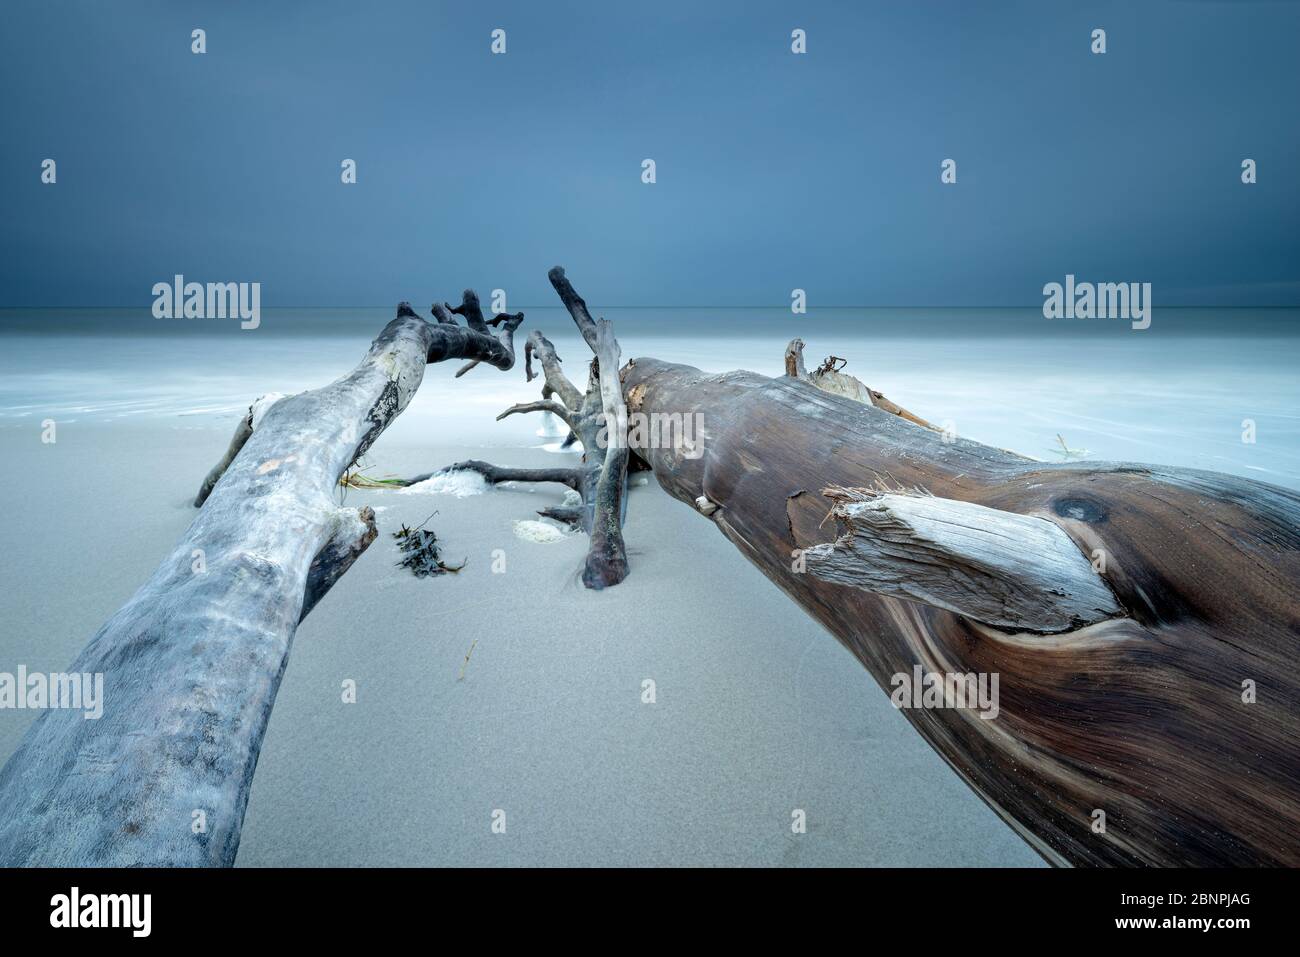 Uprooted trees on the beach of the Baltic Sea, dark clouds, long exposure, Fischland-Darß-Zingst peninsula, Vorpommersche Boddenlandschaft National Park, Mecklenburg-West Pomerania, Germany Stock Photo